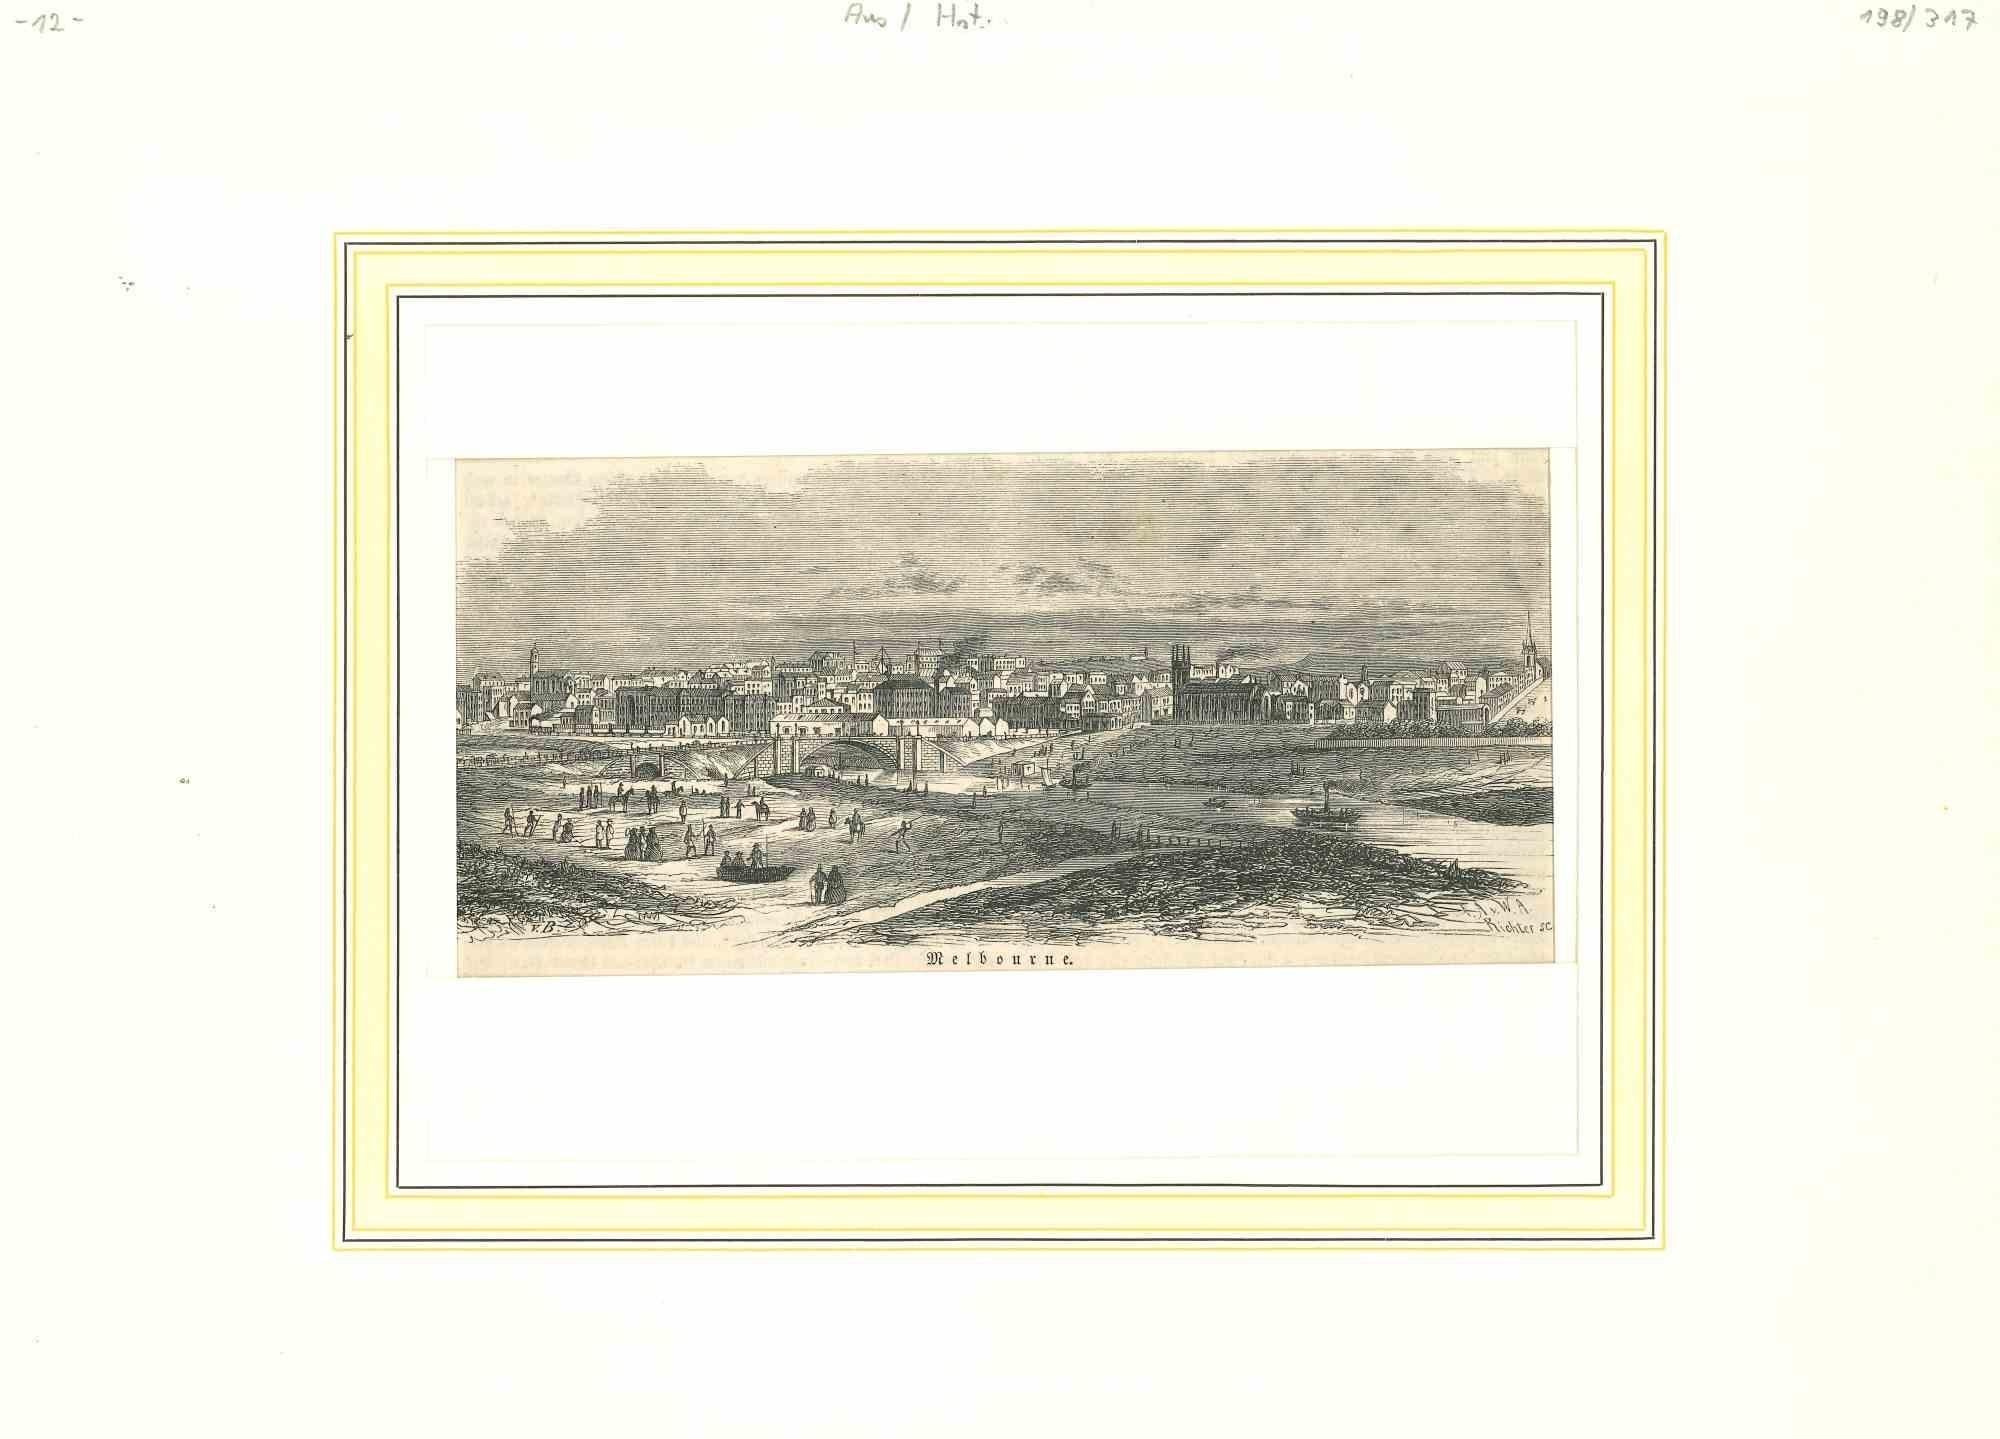 Unknown Figurative Print - Ancient View of Melbourne - Original Lithograph - Mid-19th Century